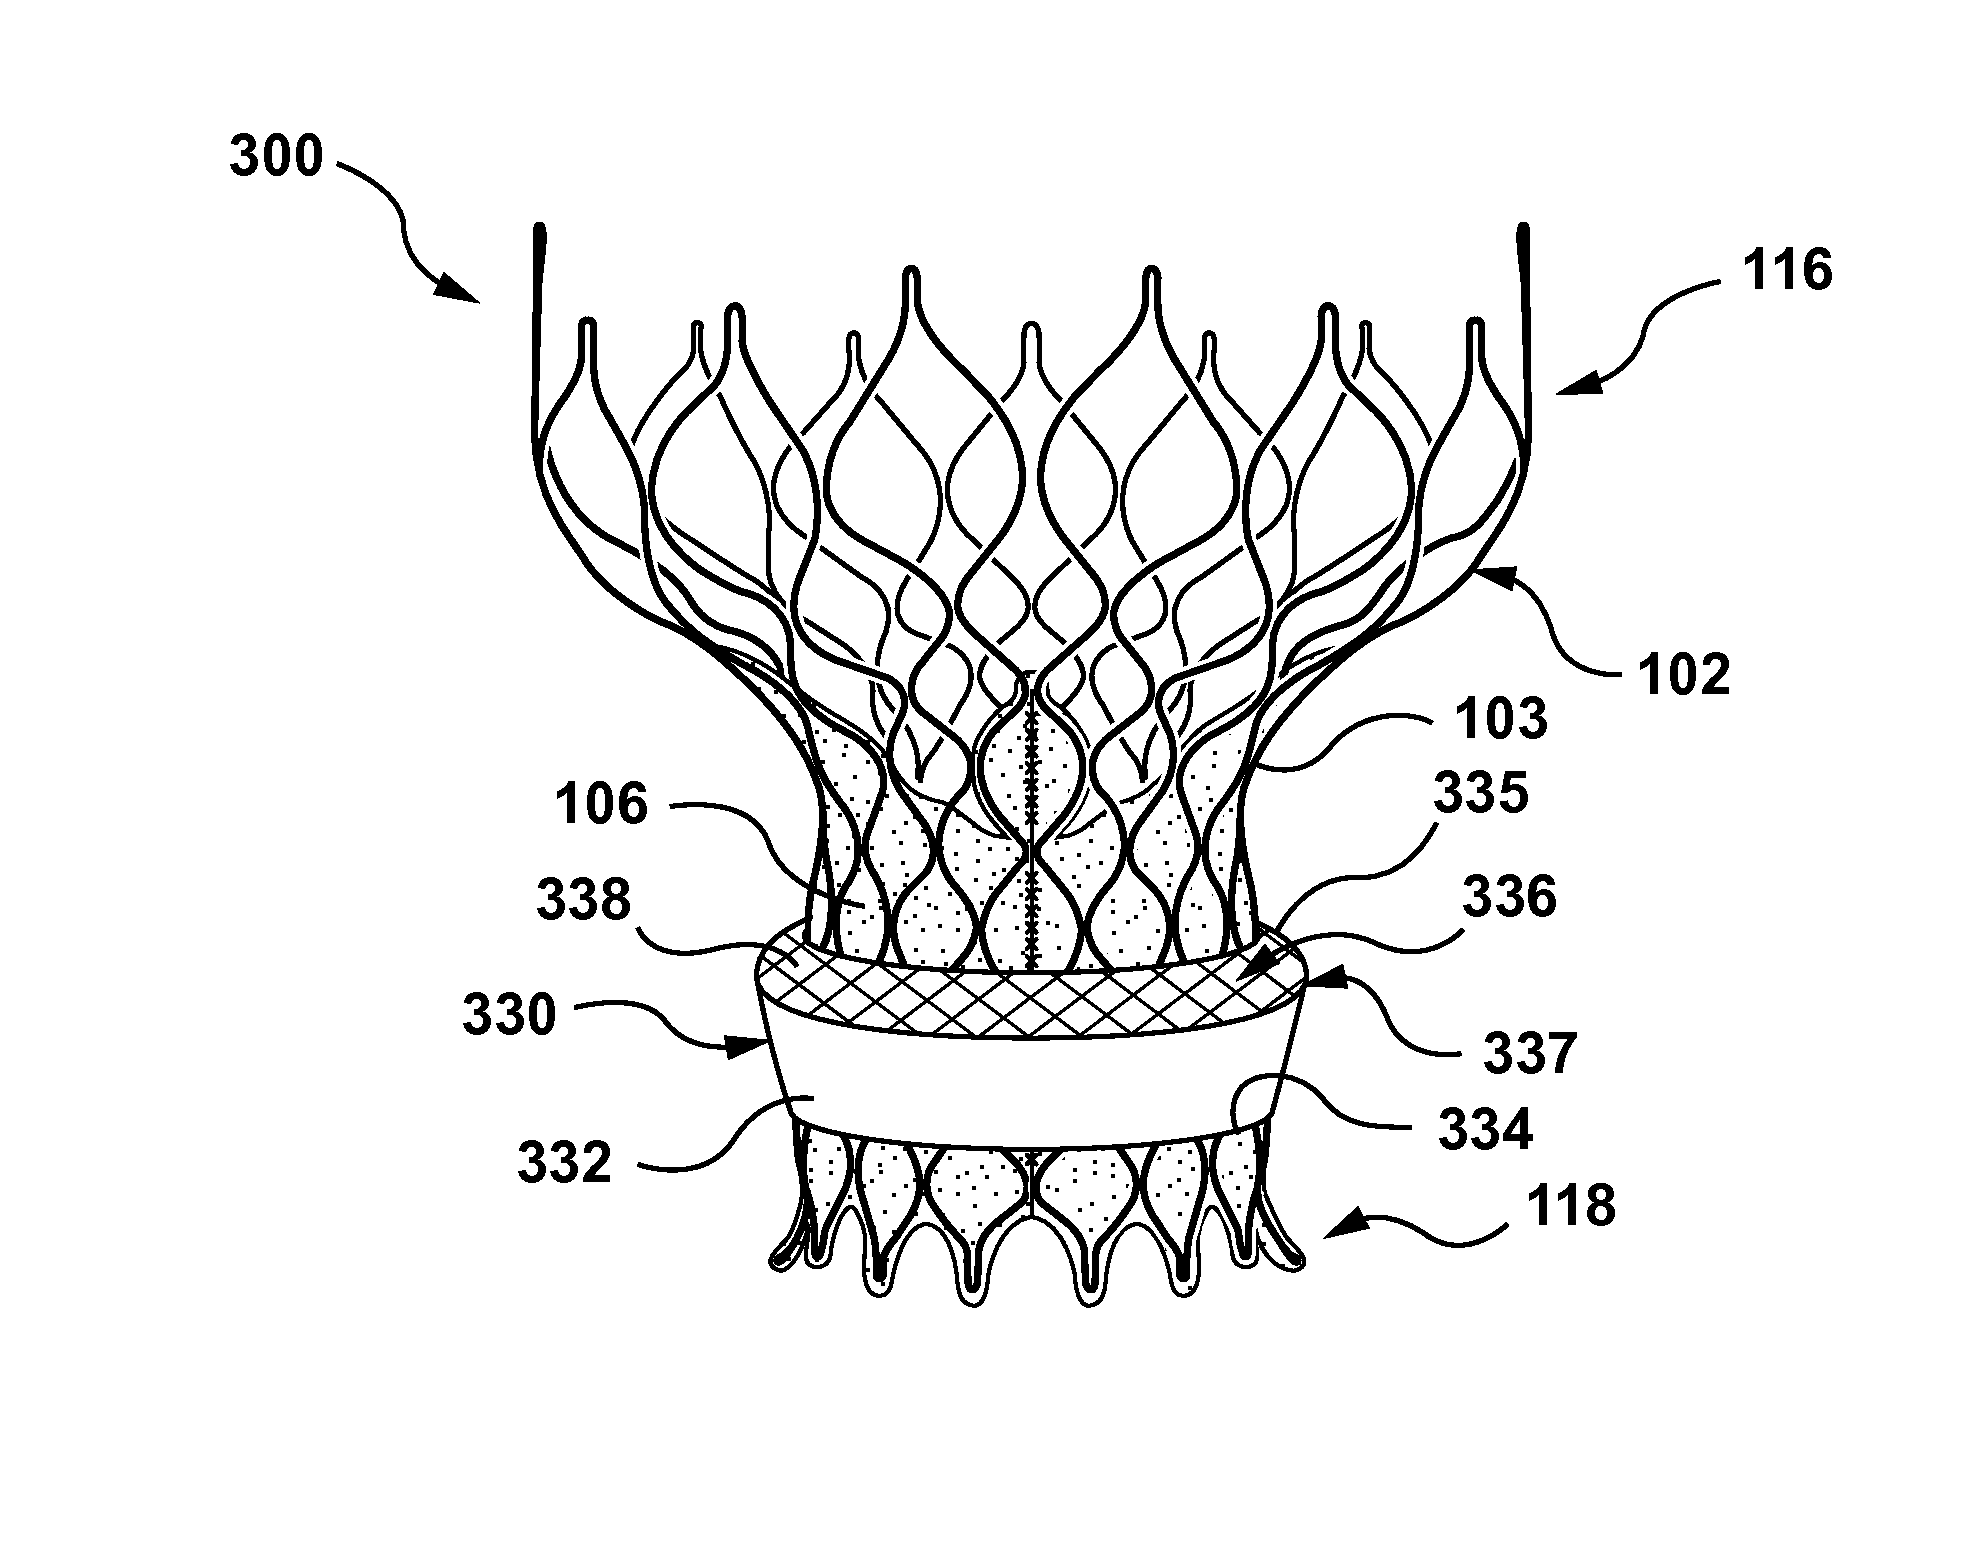 Filtered sealing components for a transcatheter valve prosthesis